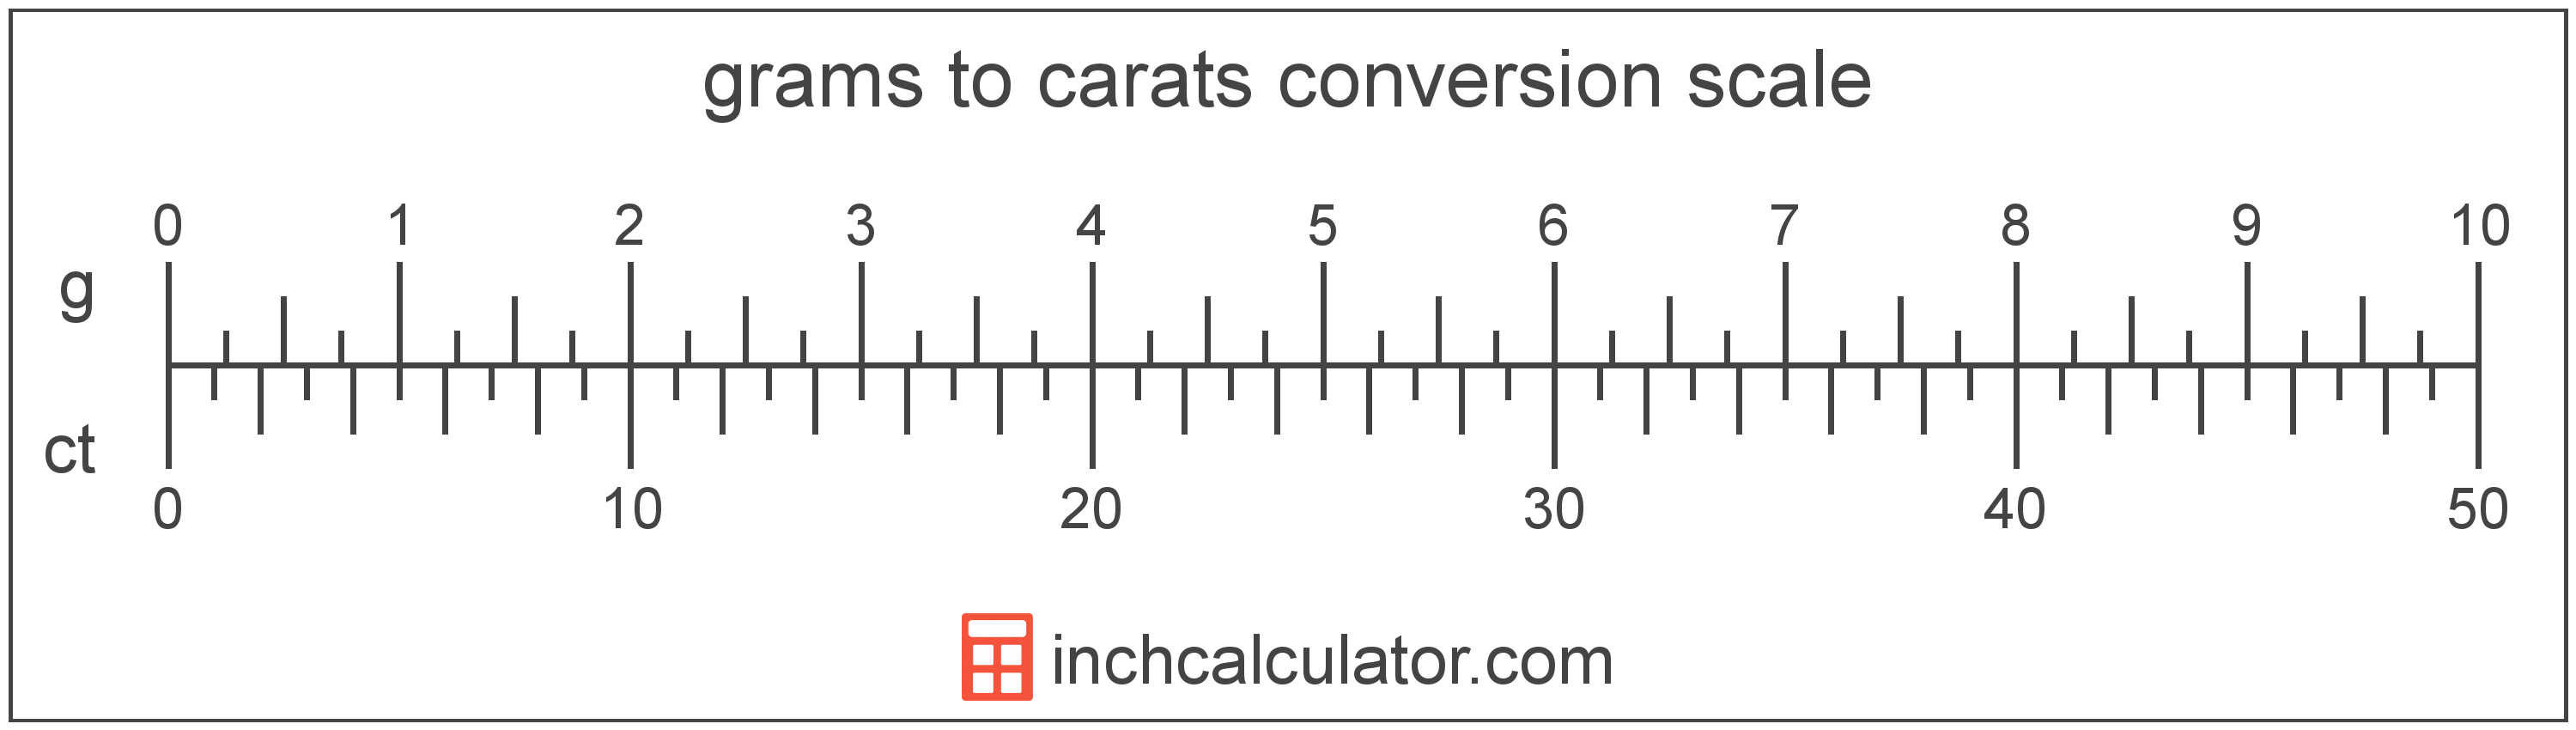 grams-to-carats-conversion-g-to-ct-inch-calculator